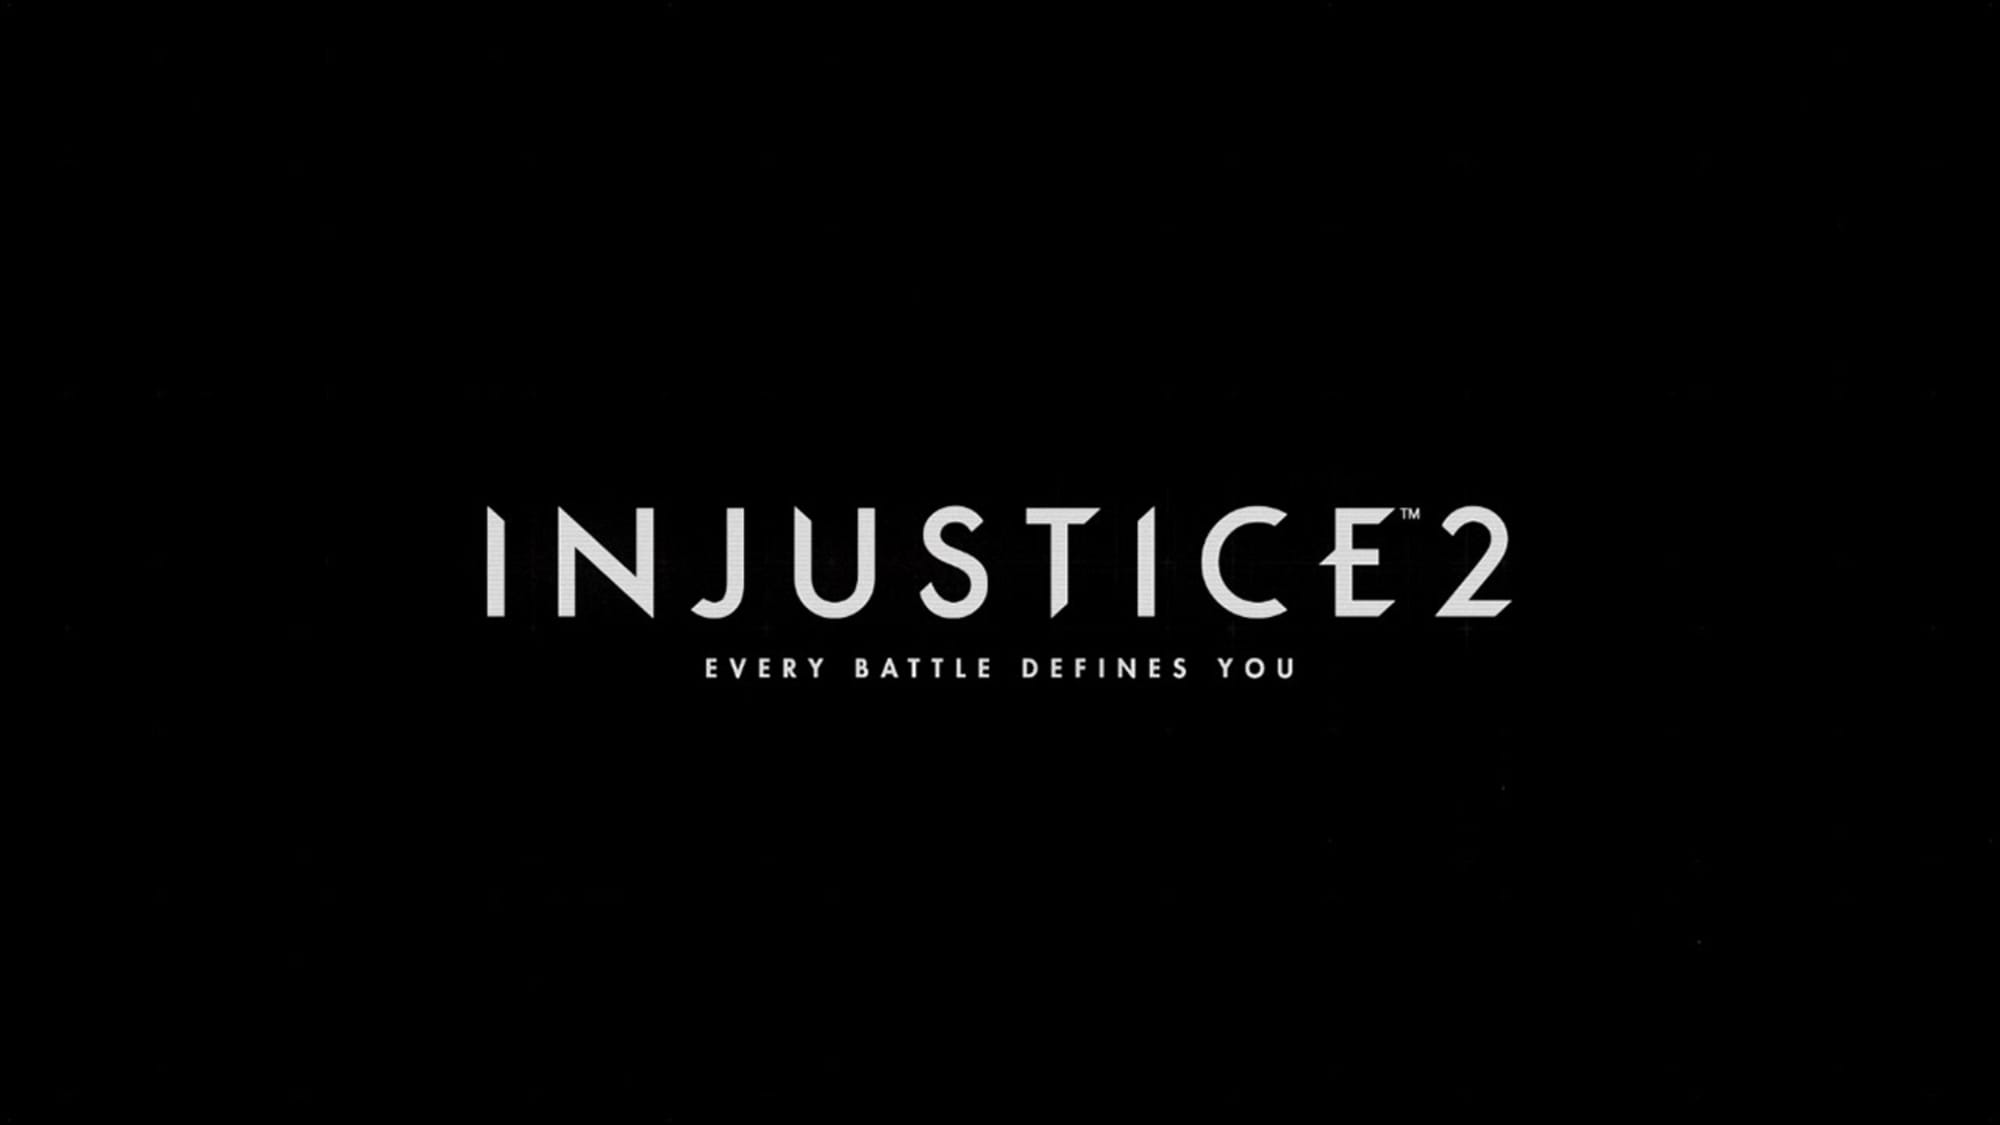 ed-boon-announces-injustice-2-release-date